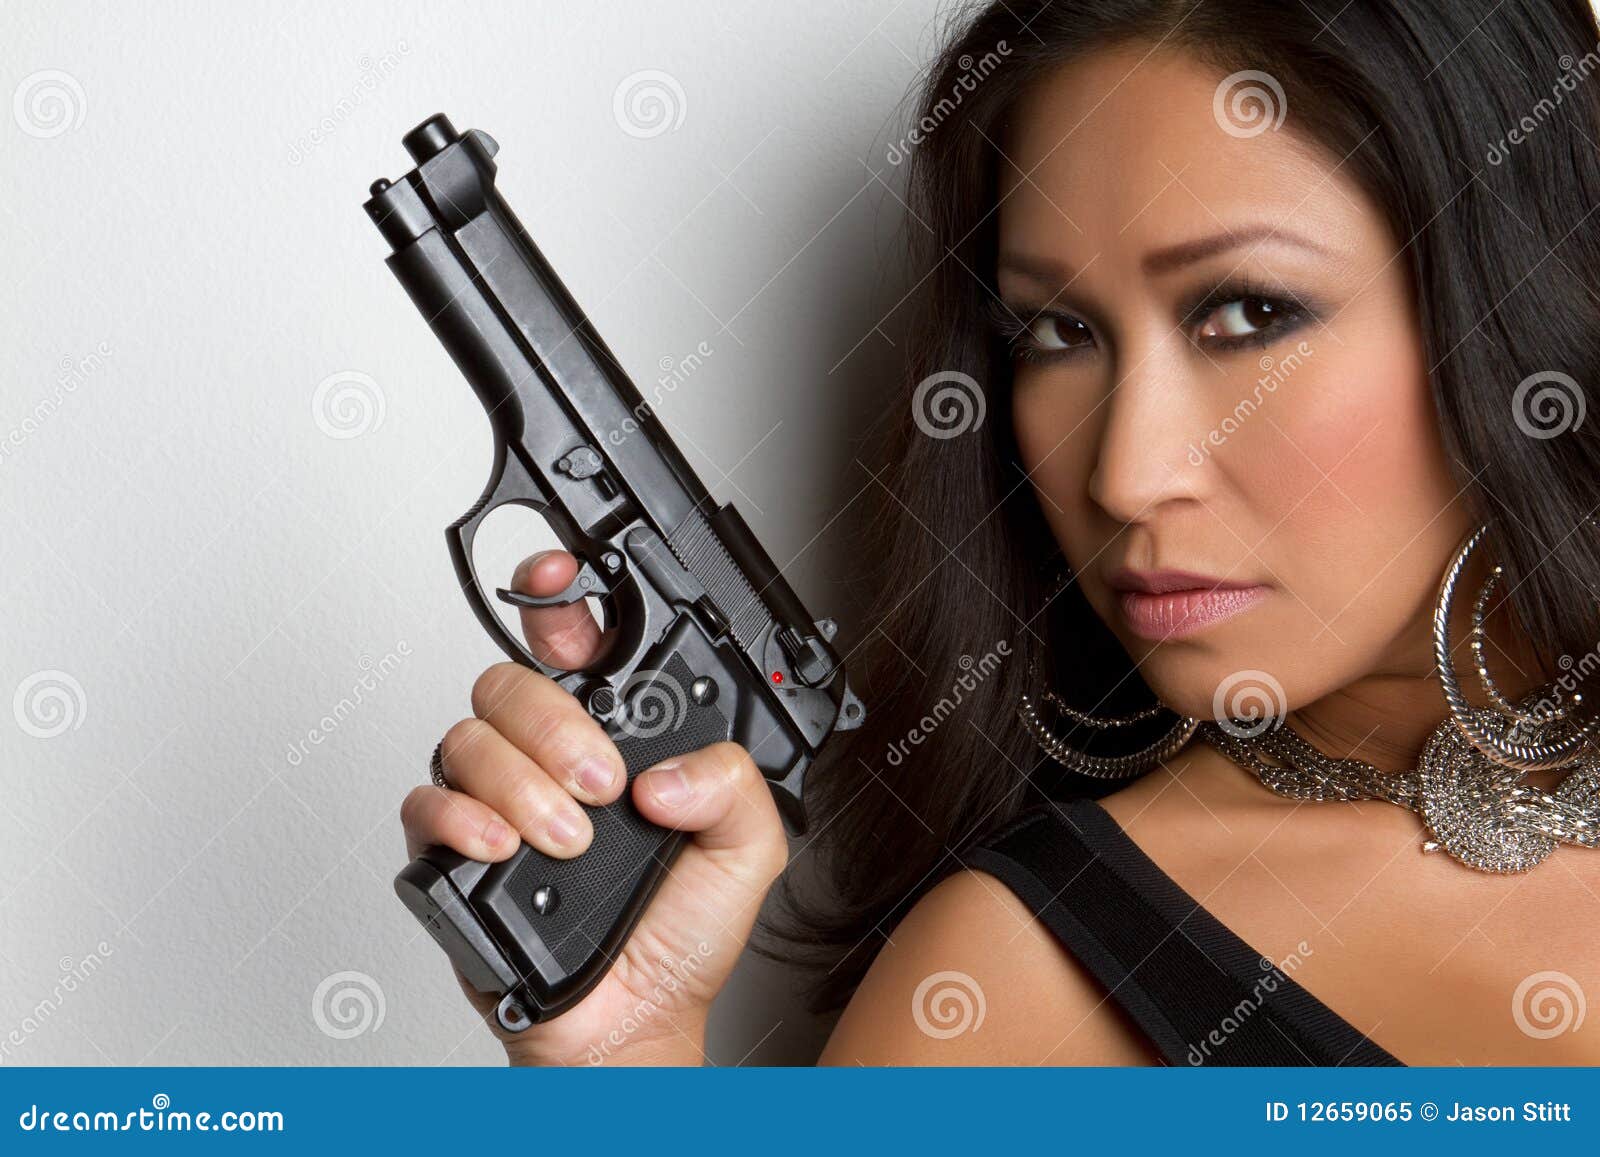 Asian Babes with Guns These Girls Come Fully Loaded 